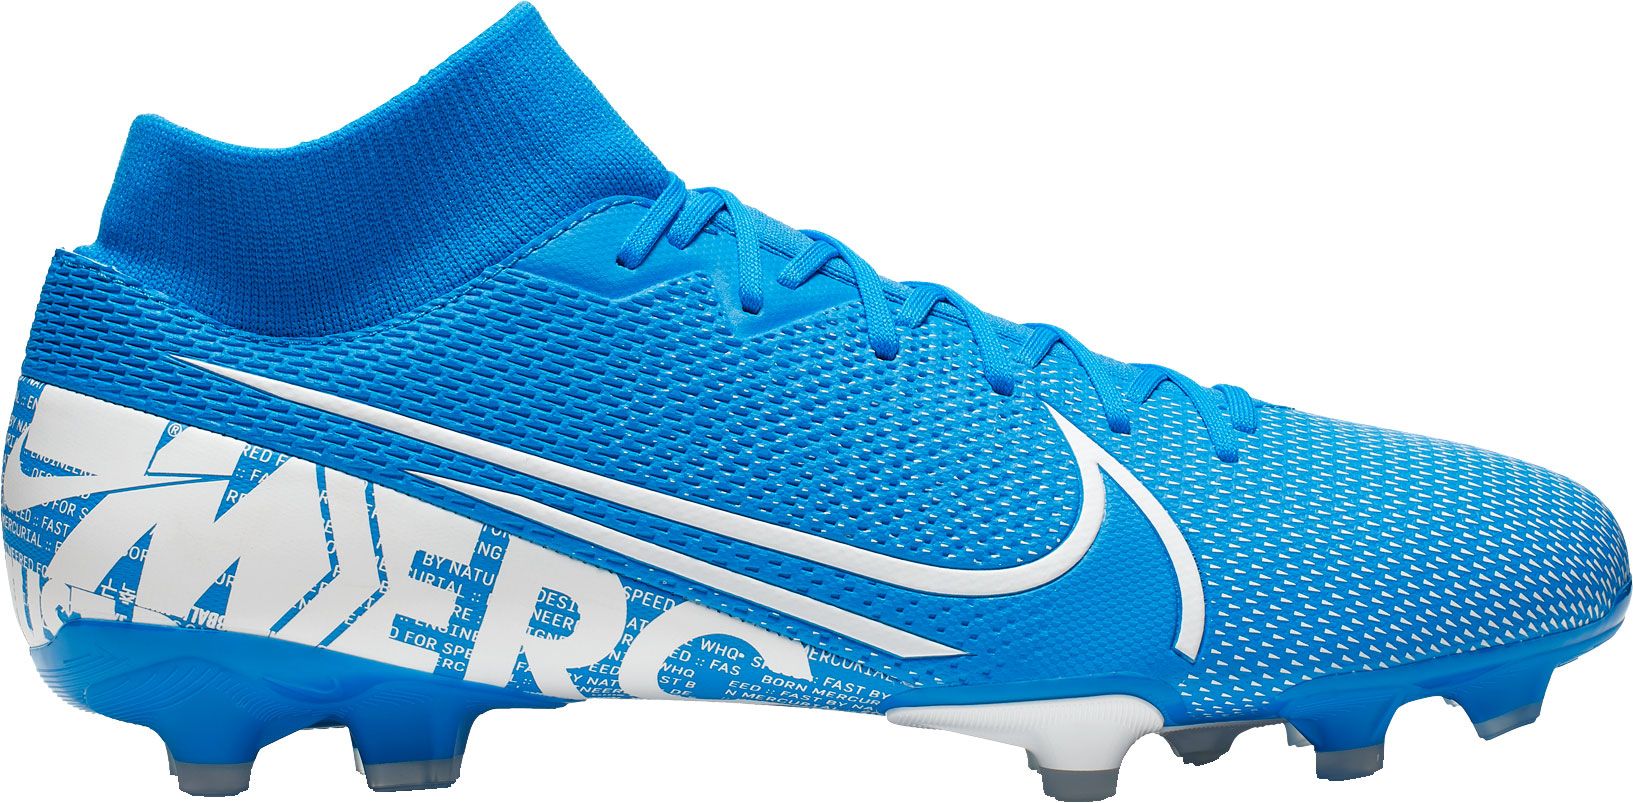 Nike Mercurial Superfly 7 Academy FG Soccer Cleats | DICK'S Sporting Goods